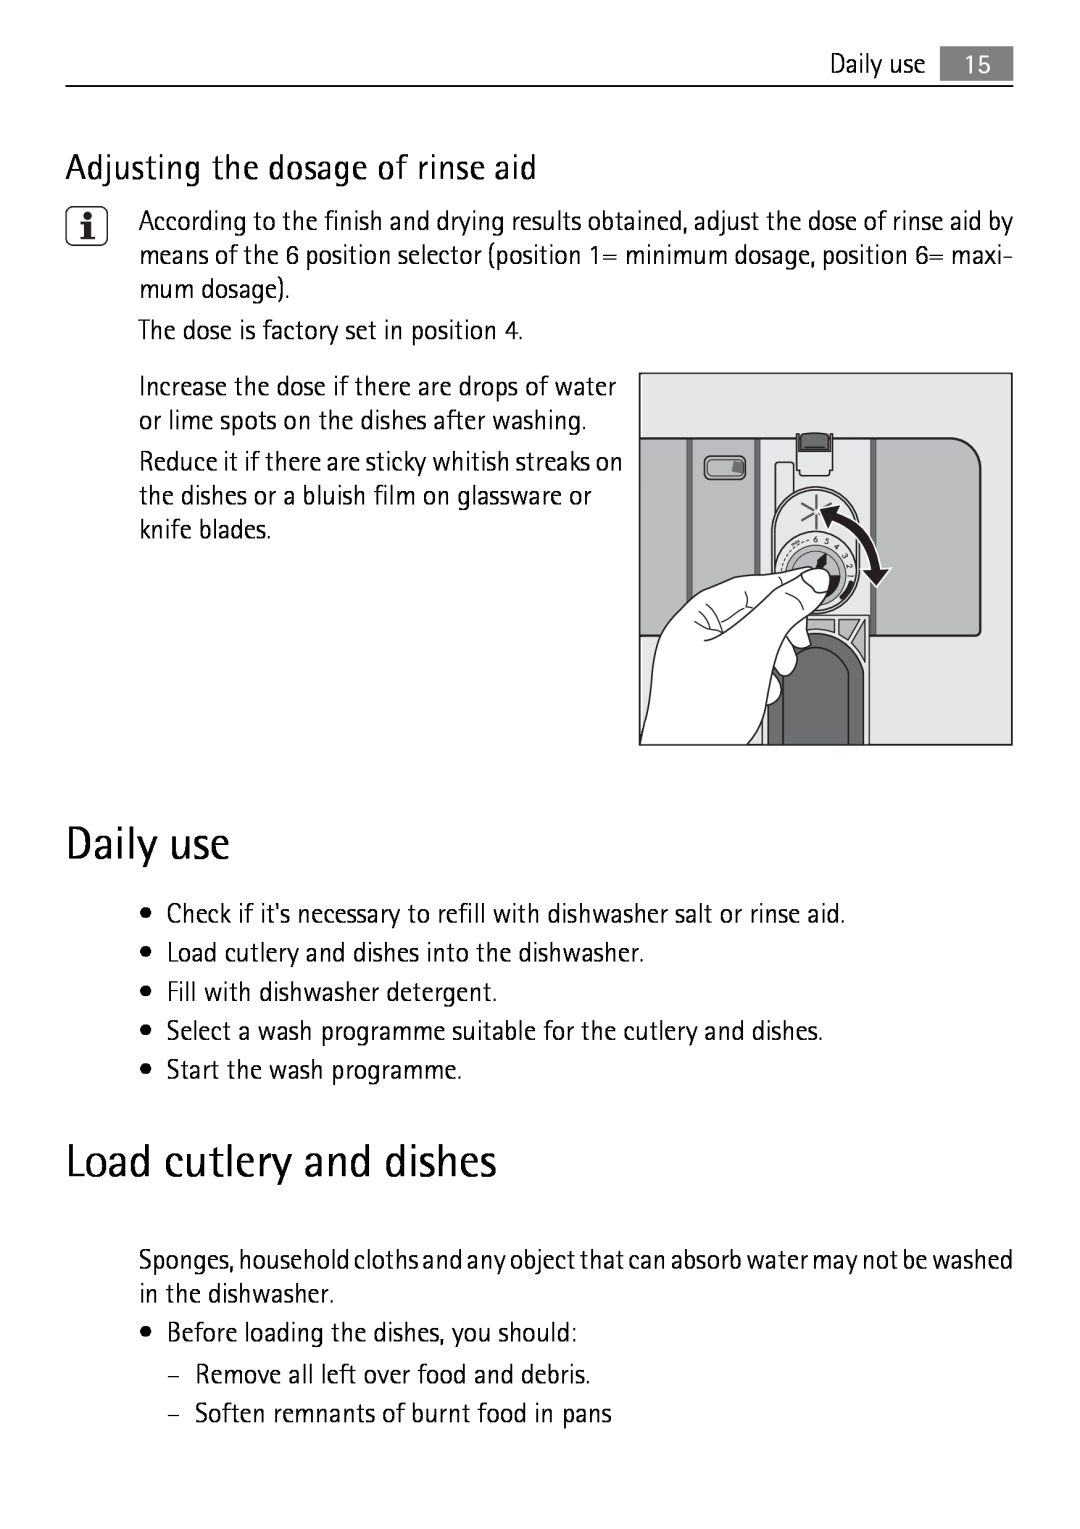 Electrolux 65011 VI user manual Daily use, Load cutlery and dishes, Adjusting the dosage of rinse aid 